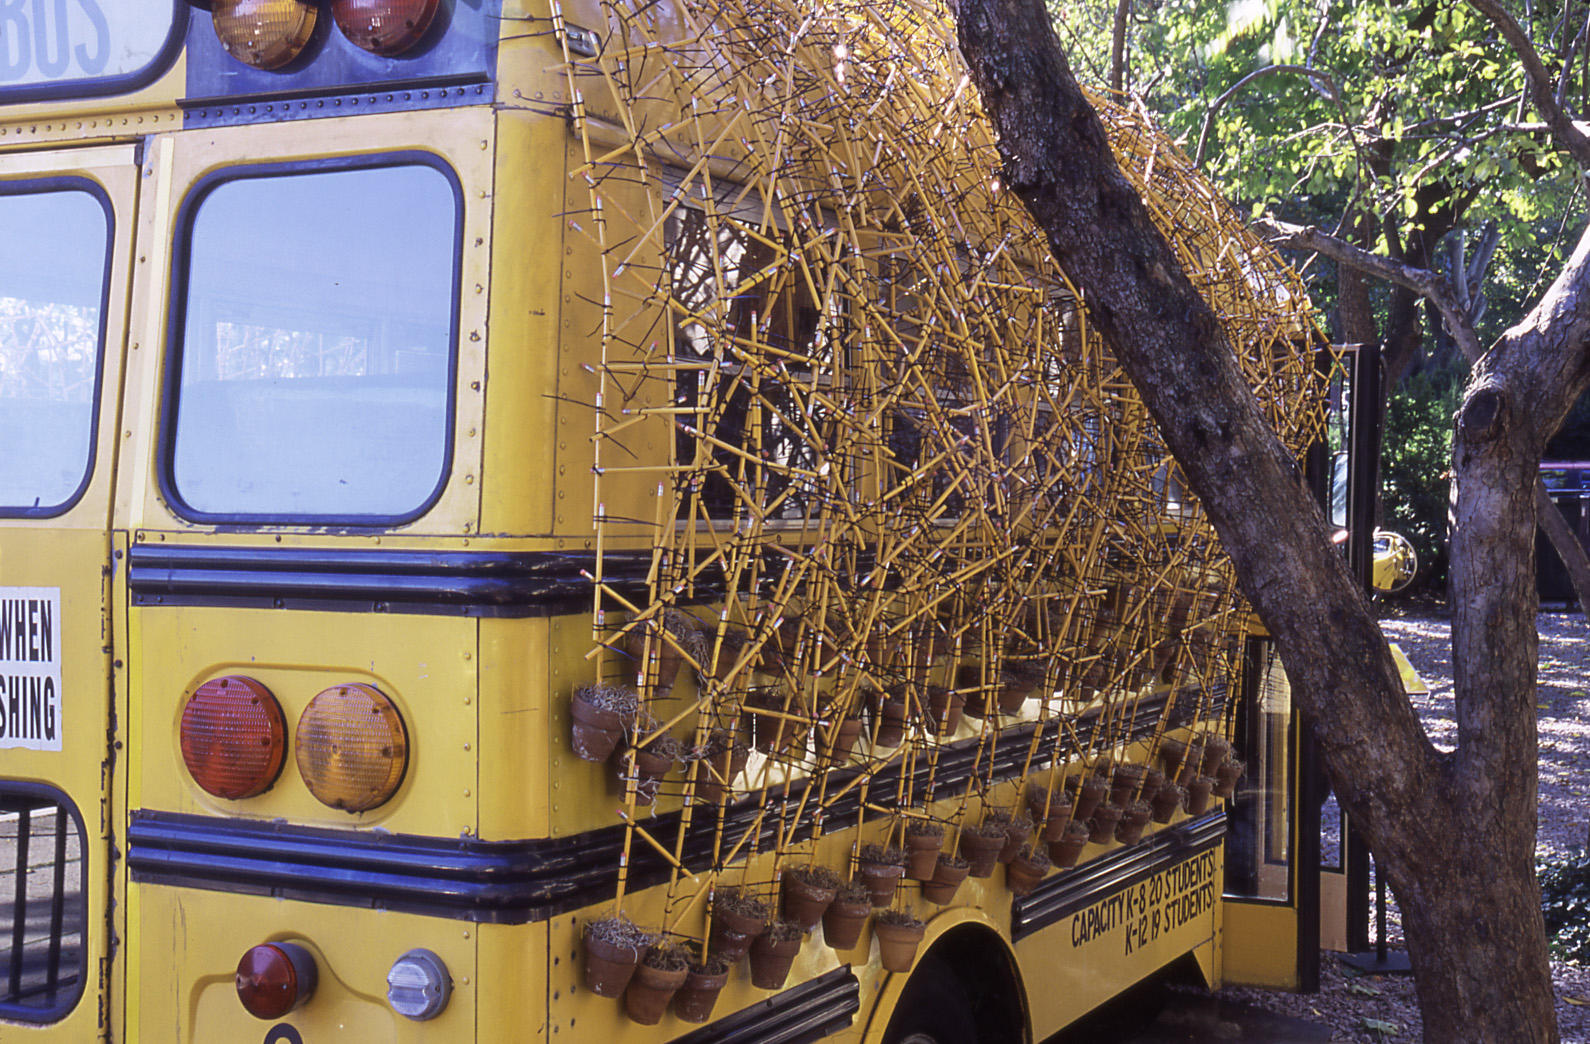 The outside of a yellow school bus with artist Nari Ward’s completed bramble of pencils, zipties, and flower pots.